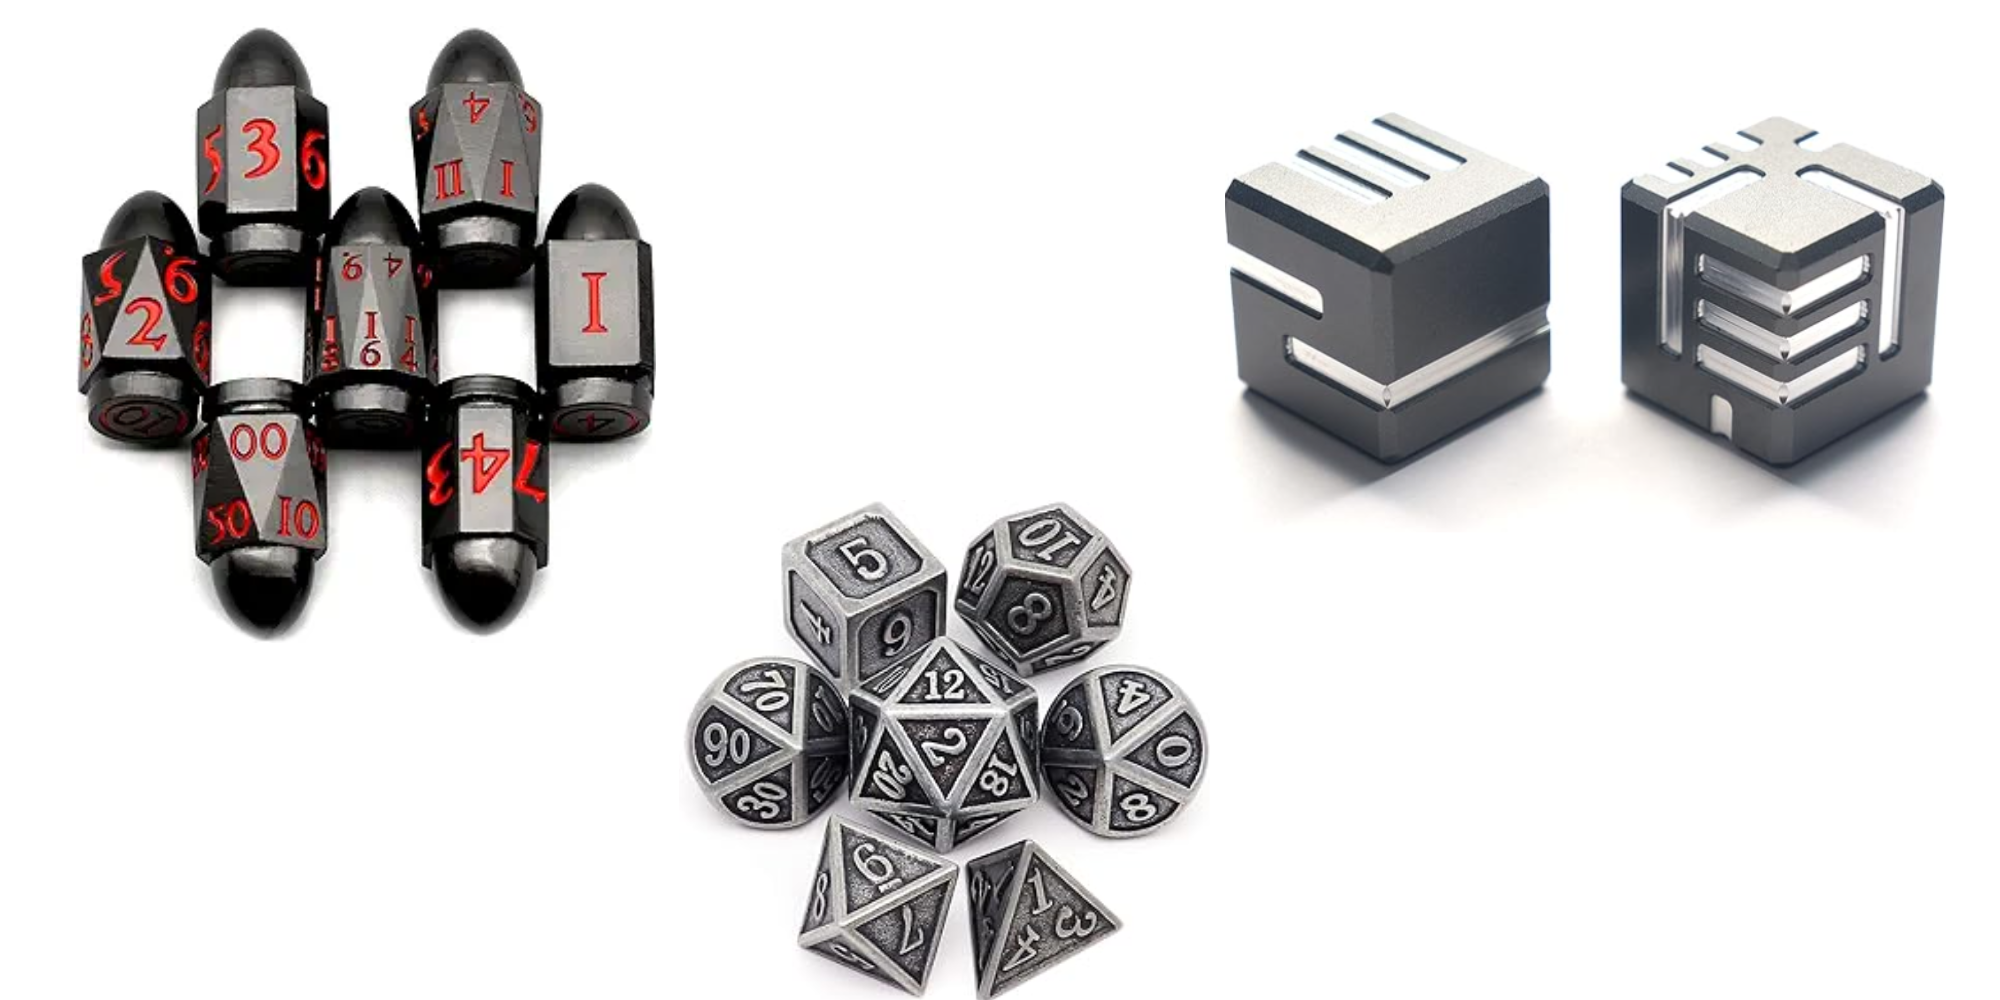 3 Metal Dice Set Against a White Background